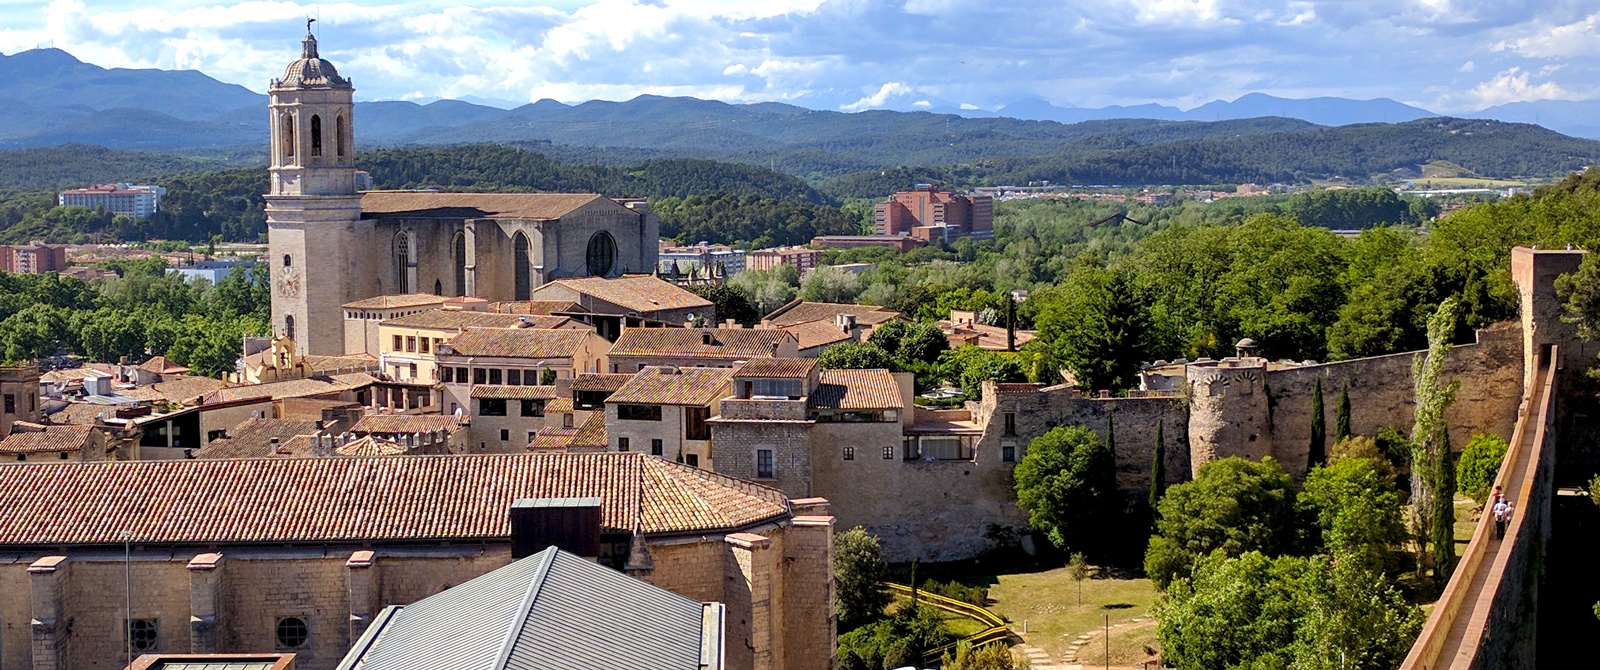 drone landscape with city shot of Old Town in Girona